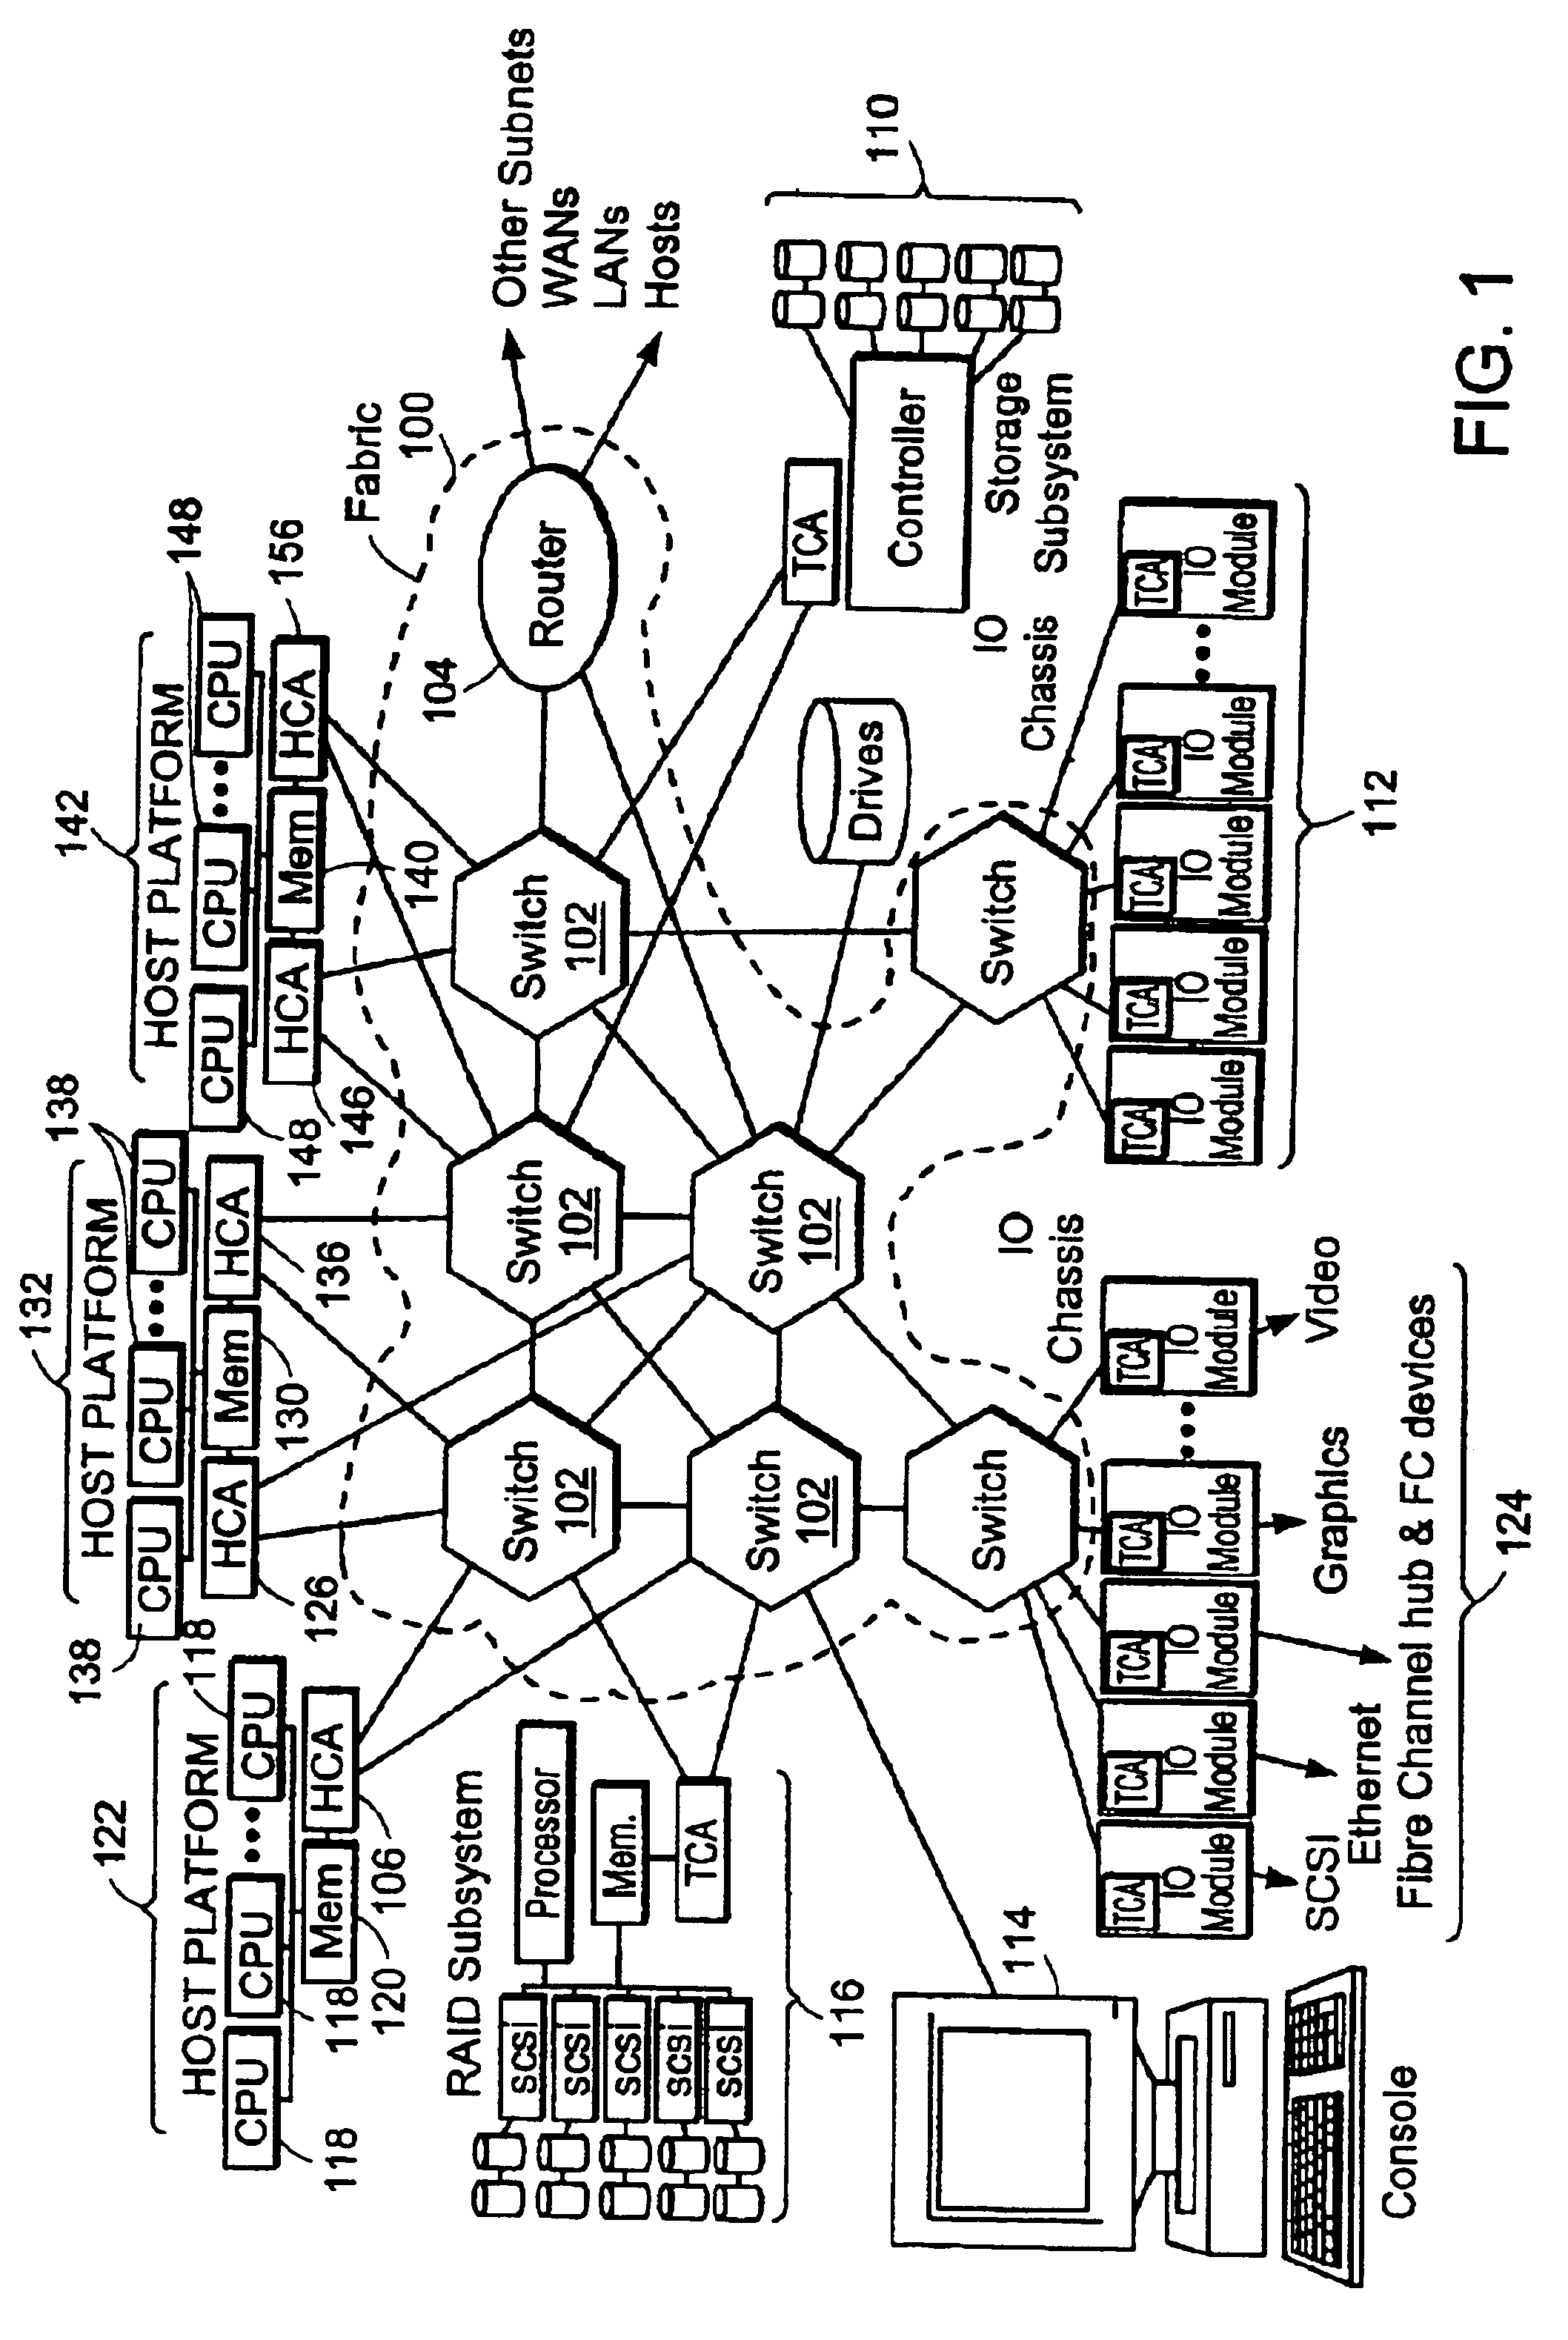 System for accessing a region of memory using remote address translation and using a memory window table and a memory region table